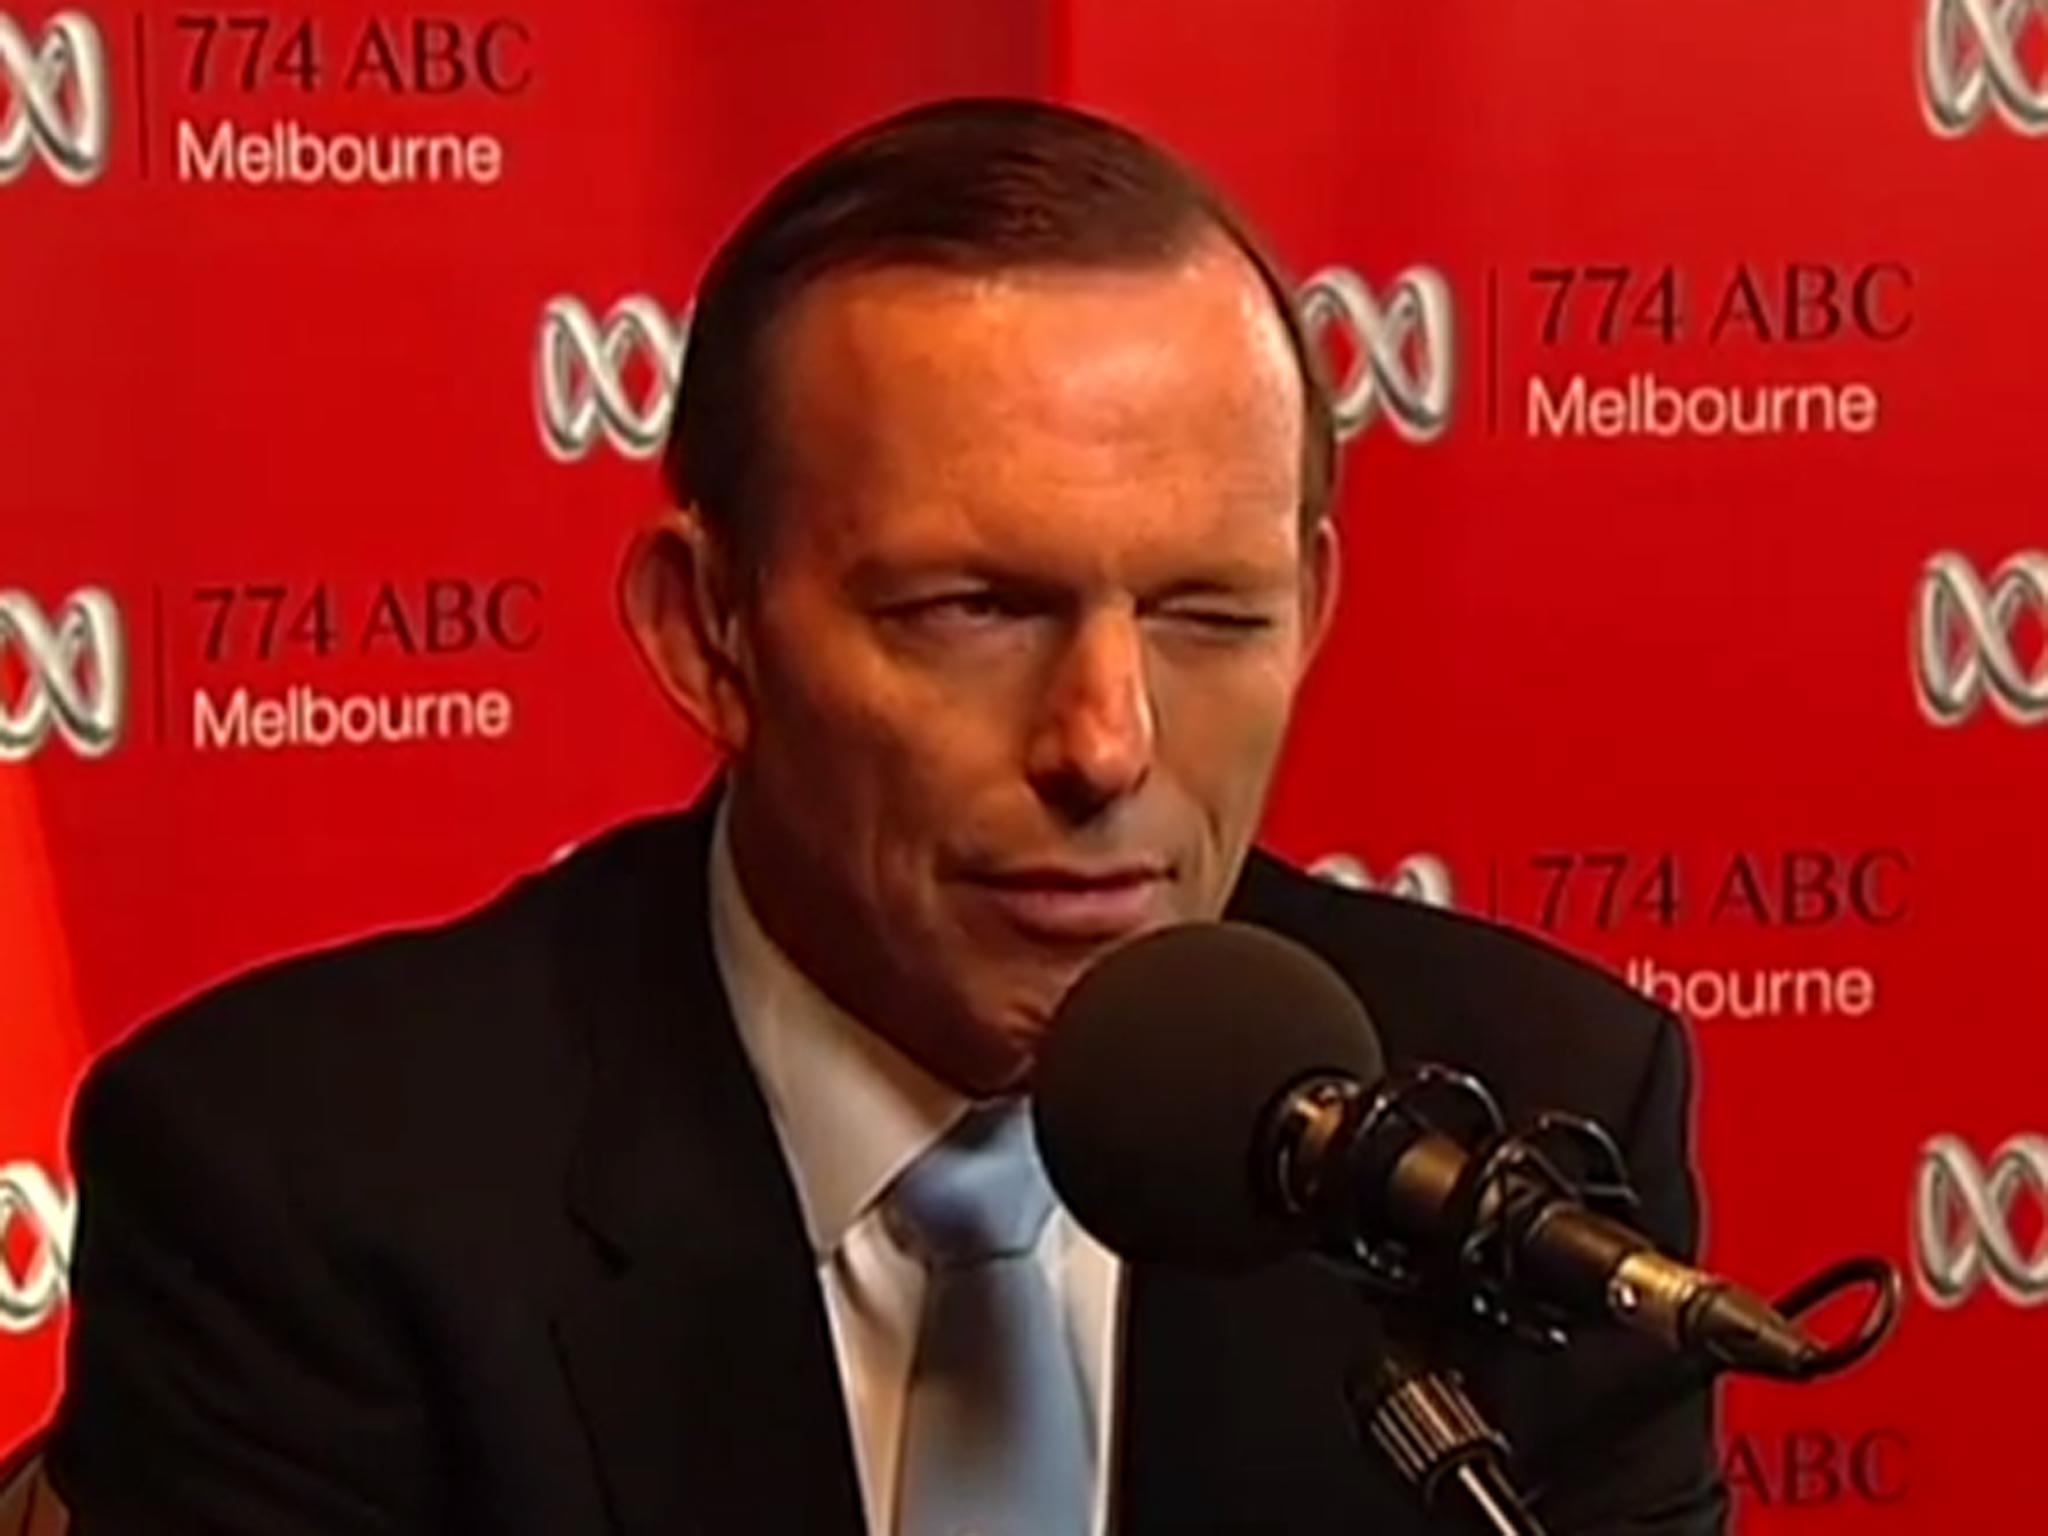 The moment Australian Prime Minister Tony Abbott winked during a serious radio phone-in last year